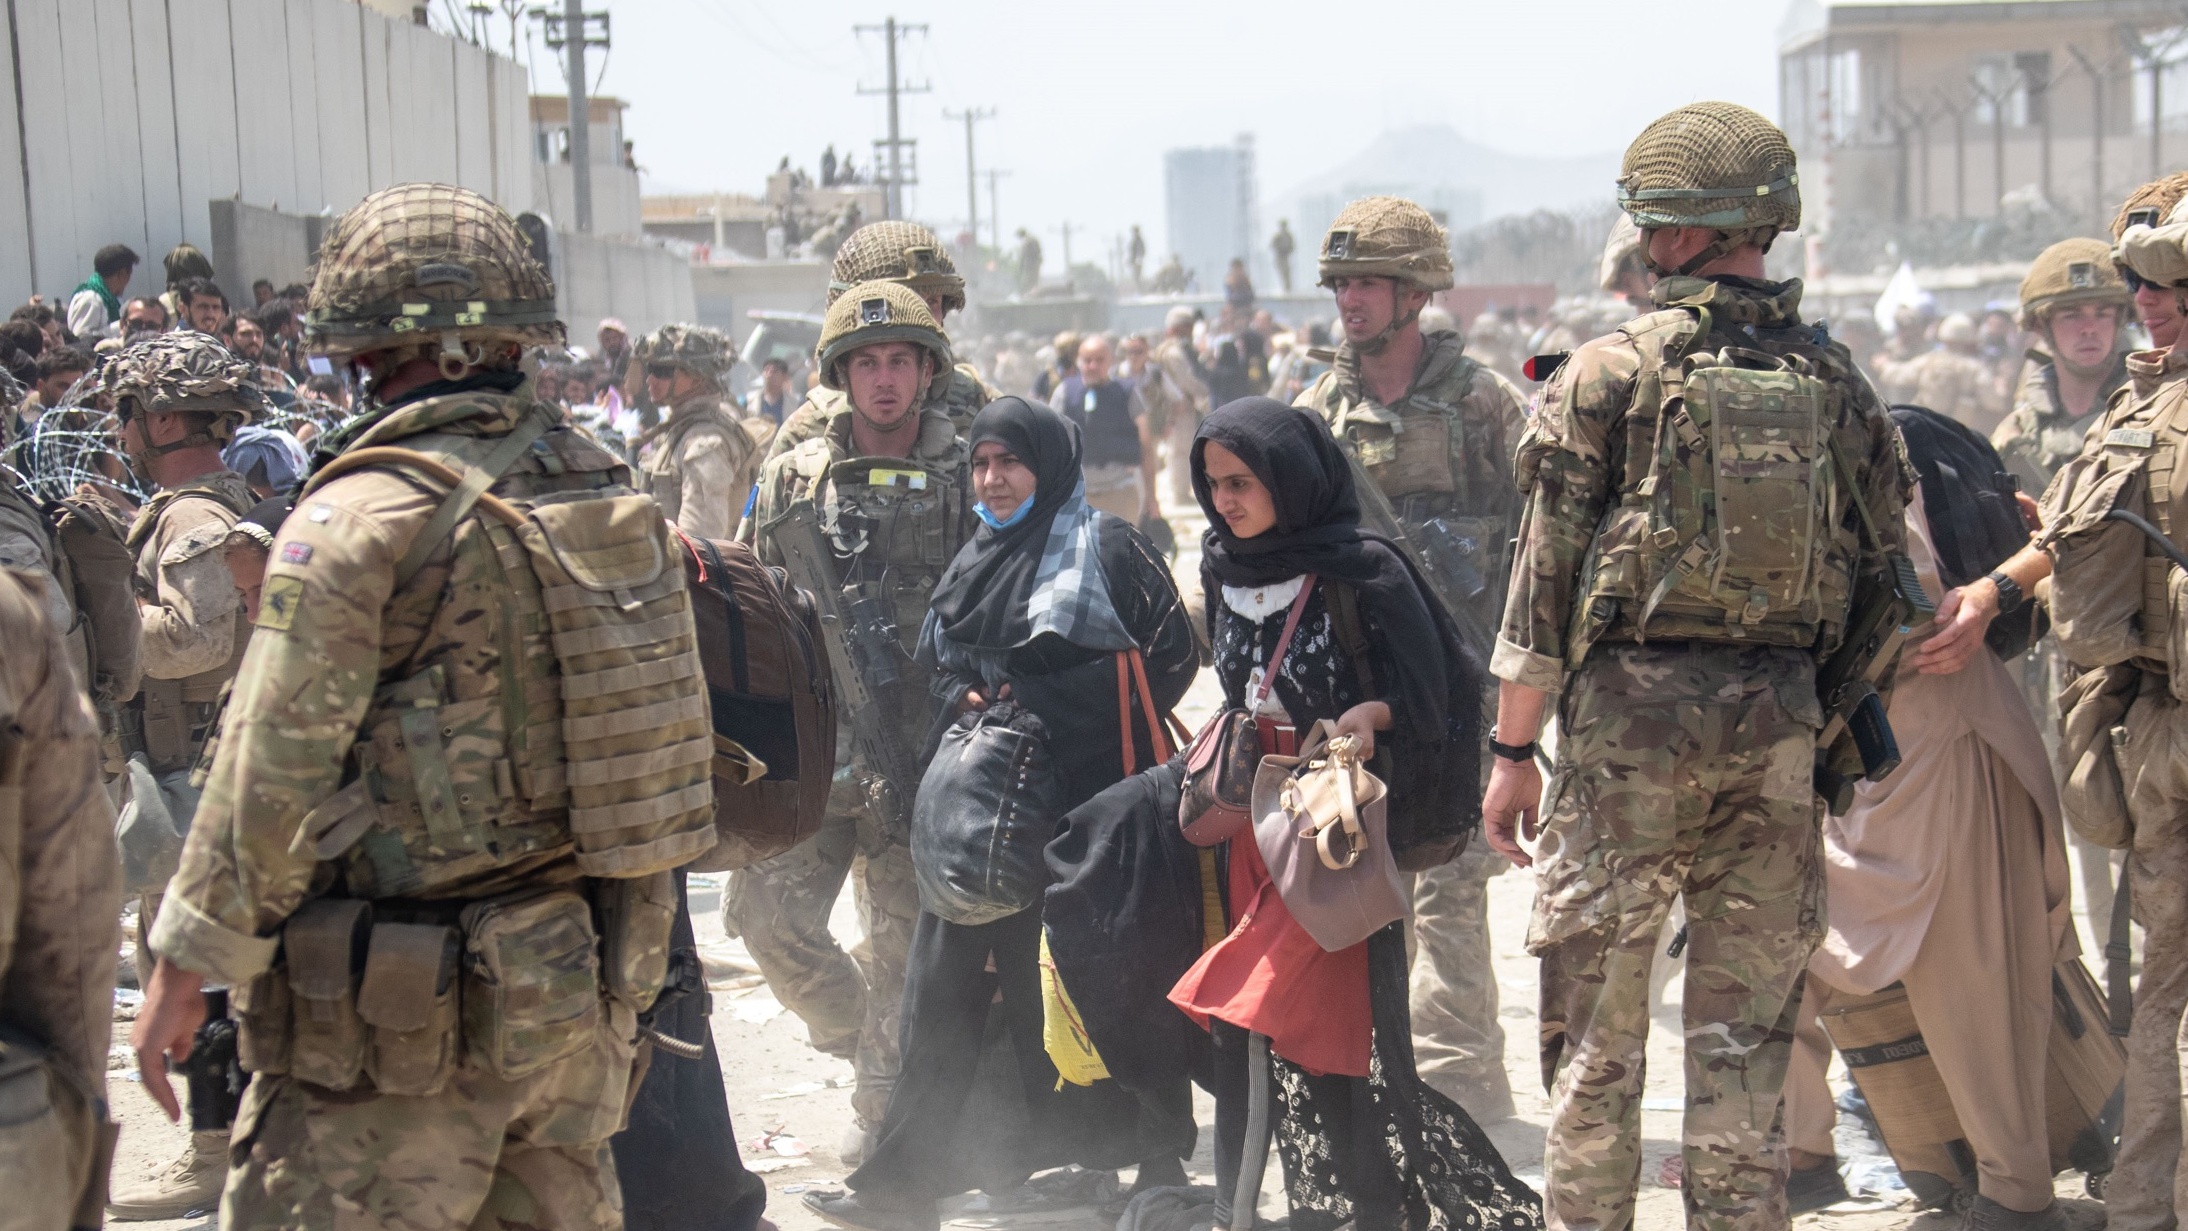 British troops involved in the evacuation at Kabul airport